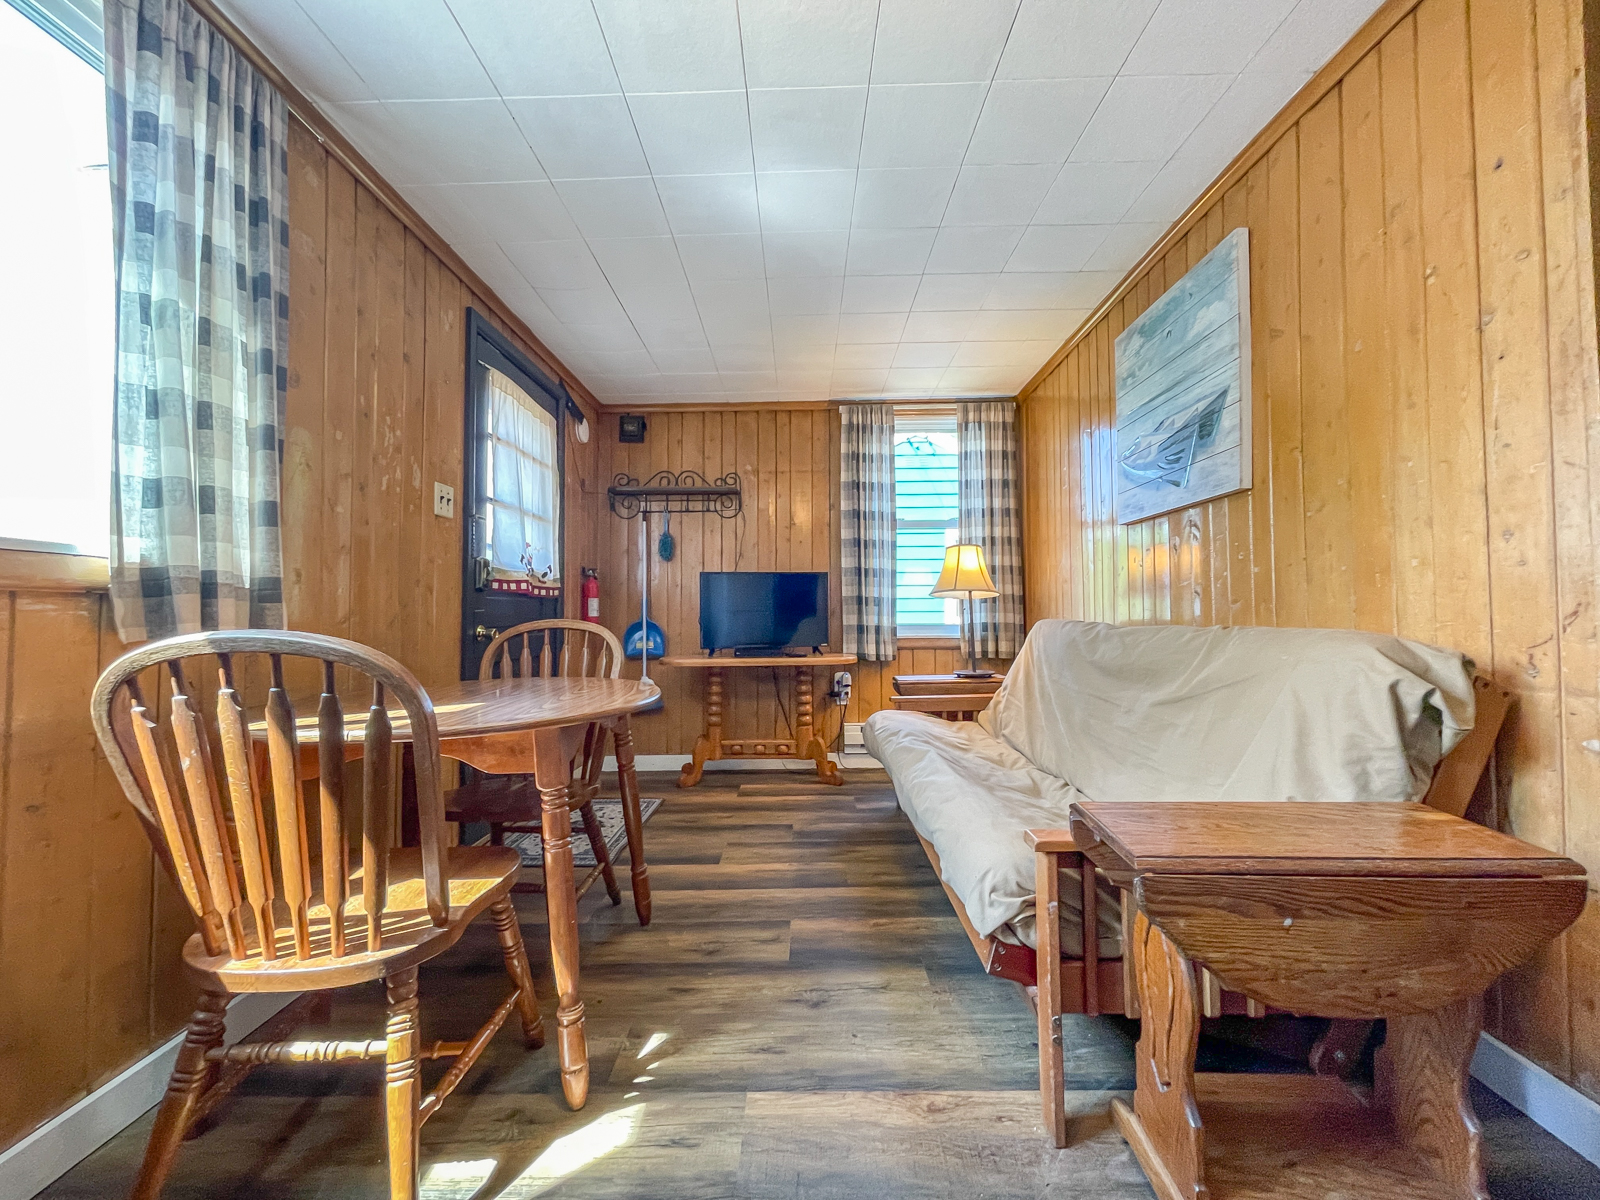 North Shore Cottages Cabin 9 Is A One Bedroom Duplex Style Cabin On